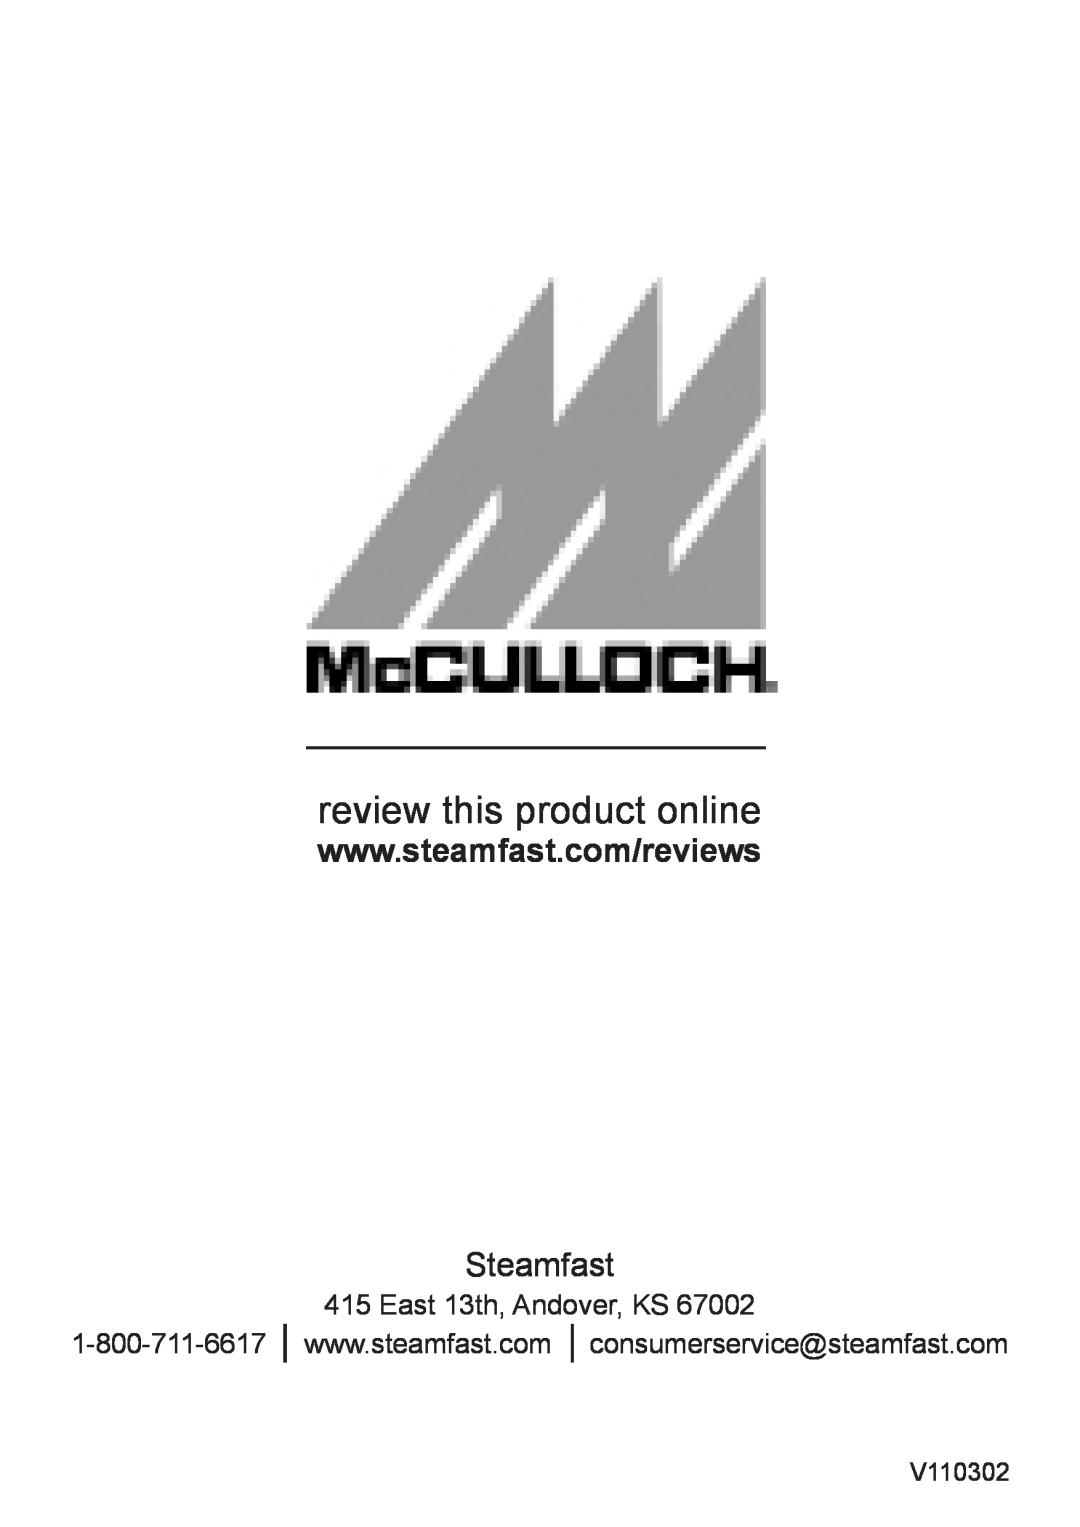 McCulloch MC1226 warranty review this product online, Steamfast, East 13th, Andover, KS, V110302 